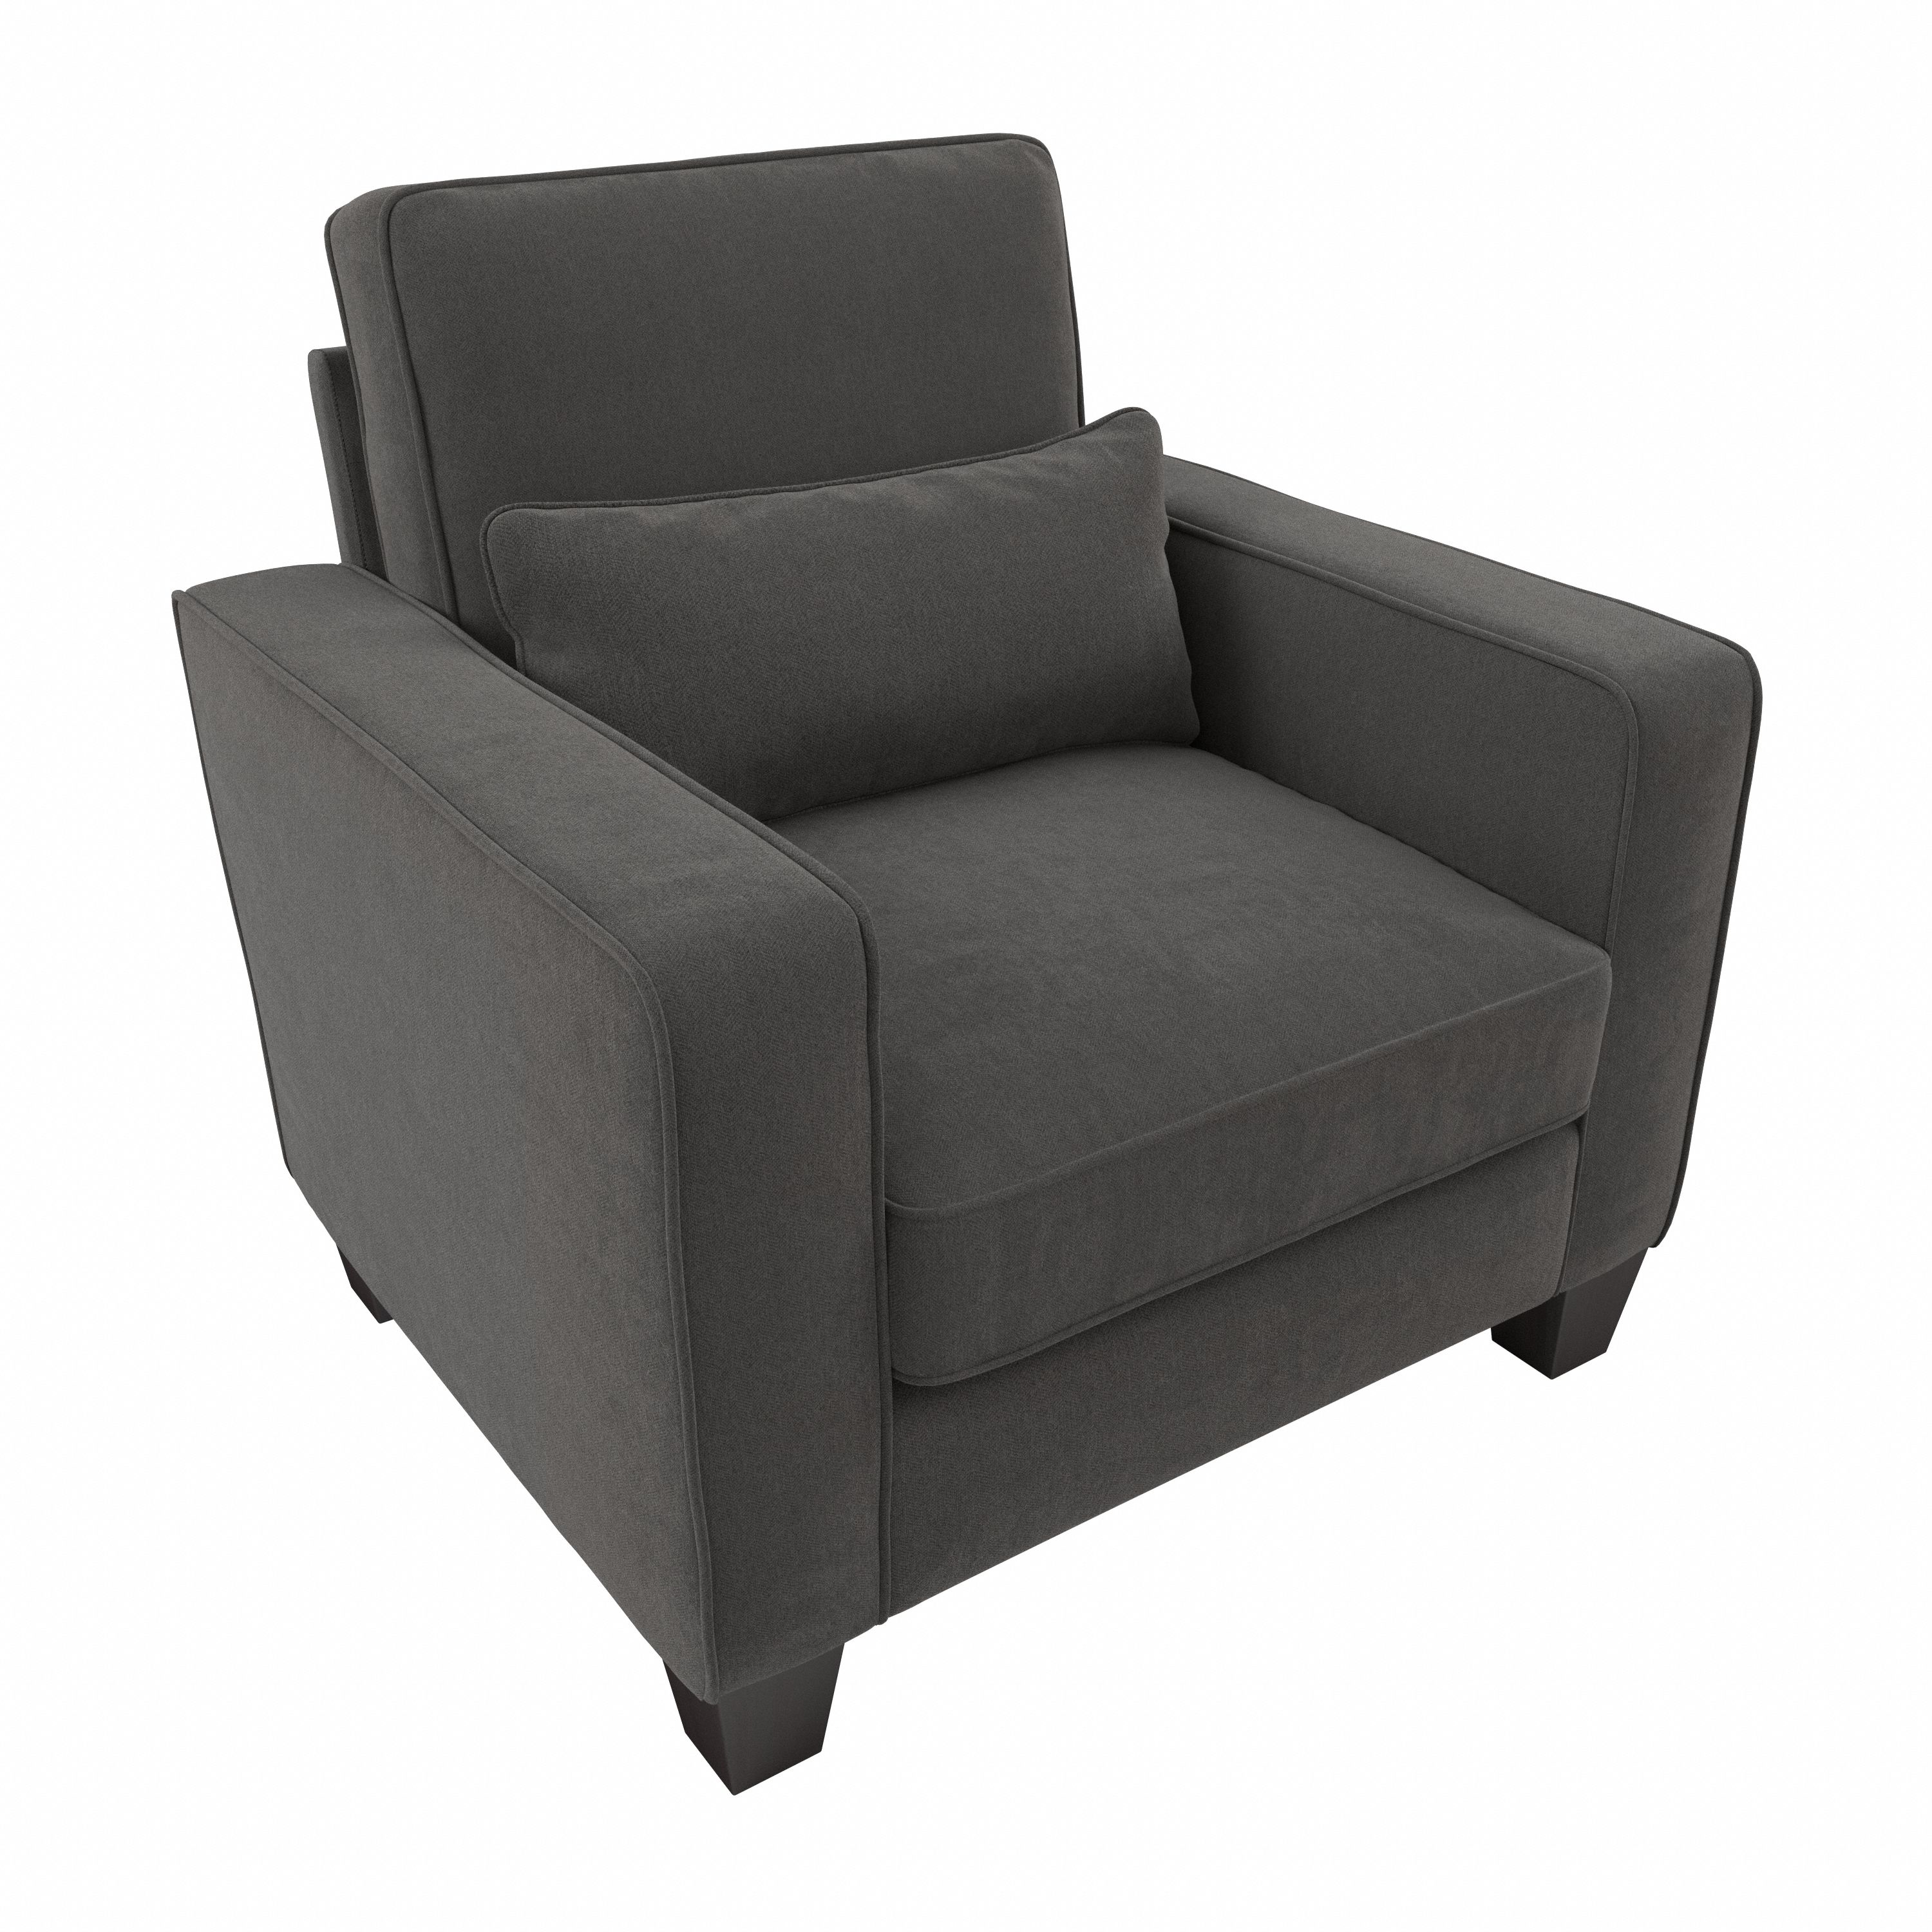 Shop Bush Furniture Stockton Accent Chair with Arms 02 SNK36SCGH-03 #color_charcoal gray herringbone fabr